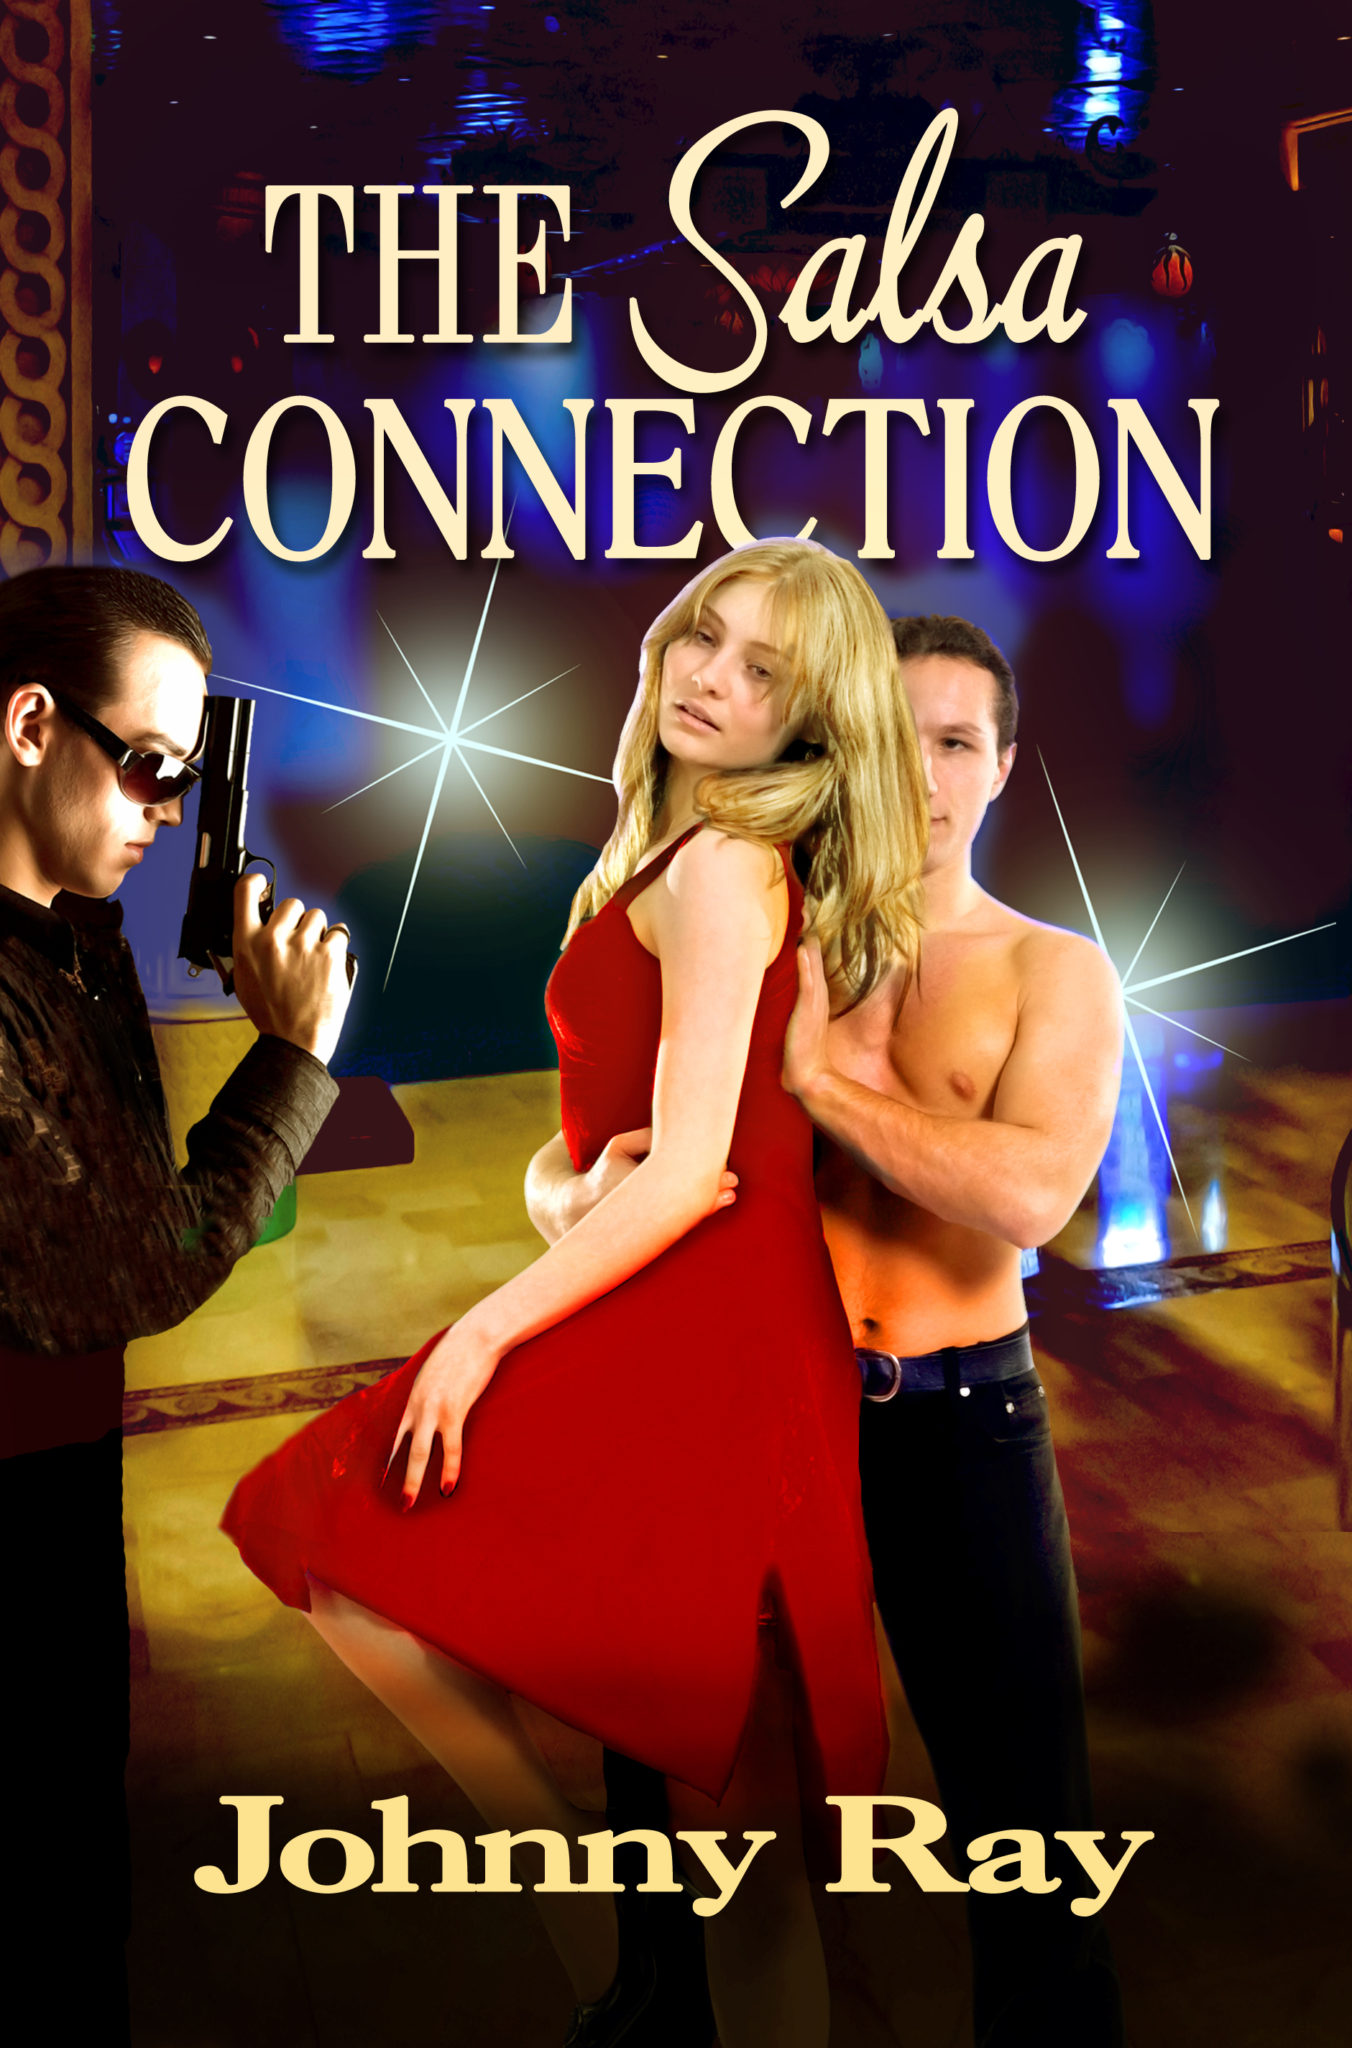 THE SALSA CONNECTION by JOHNNY RAY